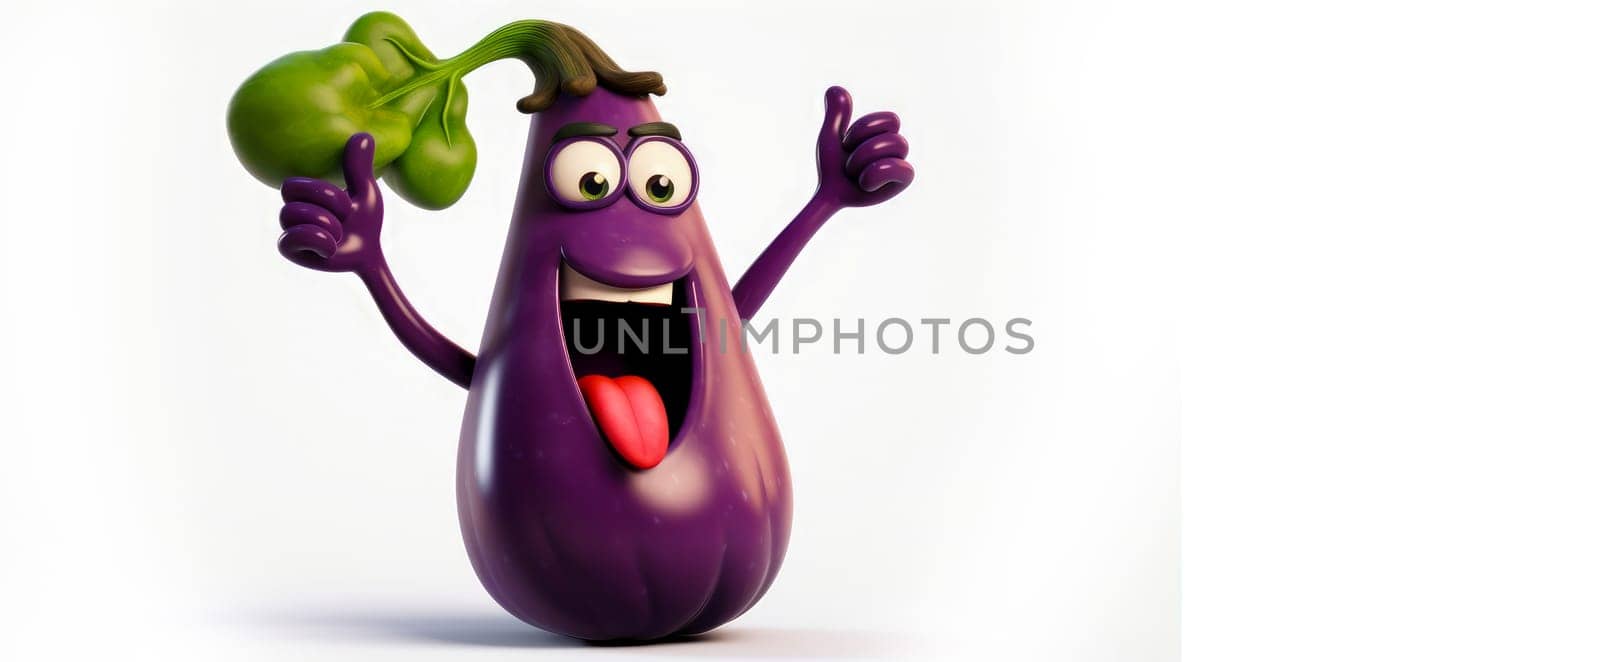 Eggplant with a cheerful face 3D on a white background. Cartoon characters, three-dimensional character, healthy lifestyle, proper nutrition, diet, fresh vegetables and fruits, vegetarianism, veganism, food, breakfast, fun, laughter, banner